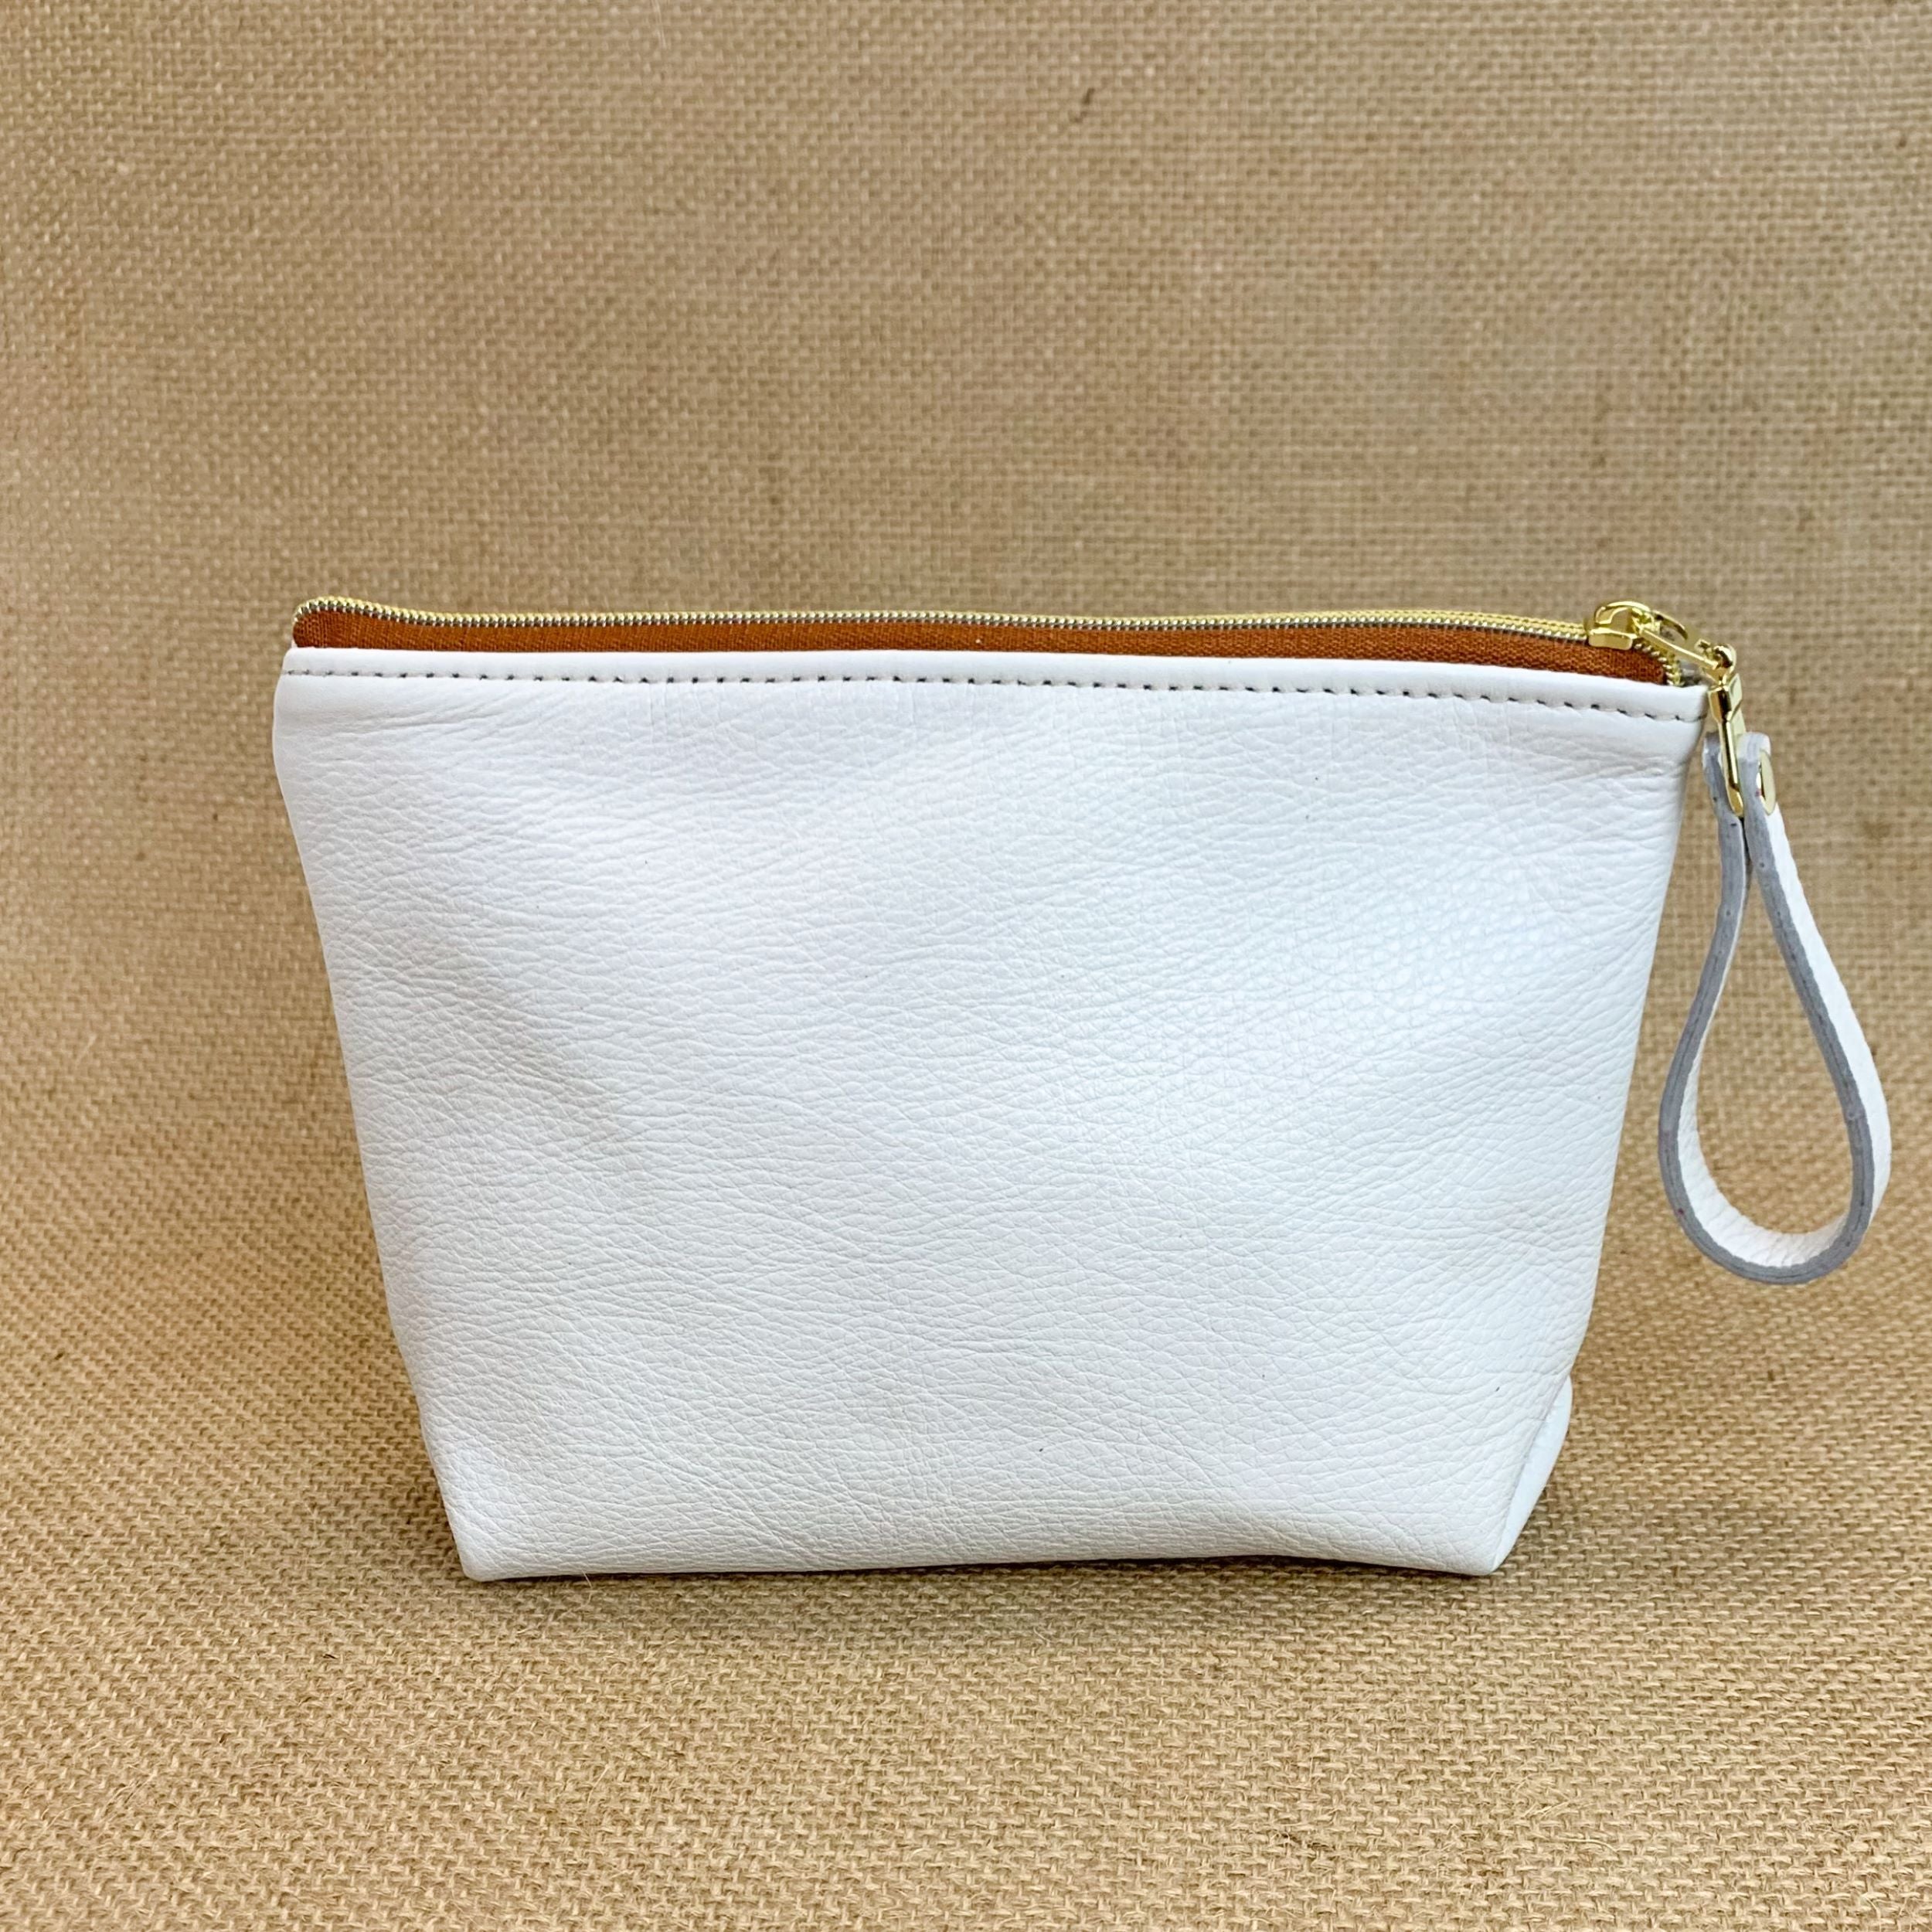 Back view T5 Cosmetics case toiletry bag designer handcrafted in smooth calf leather in yacht white..